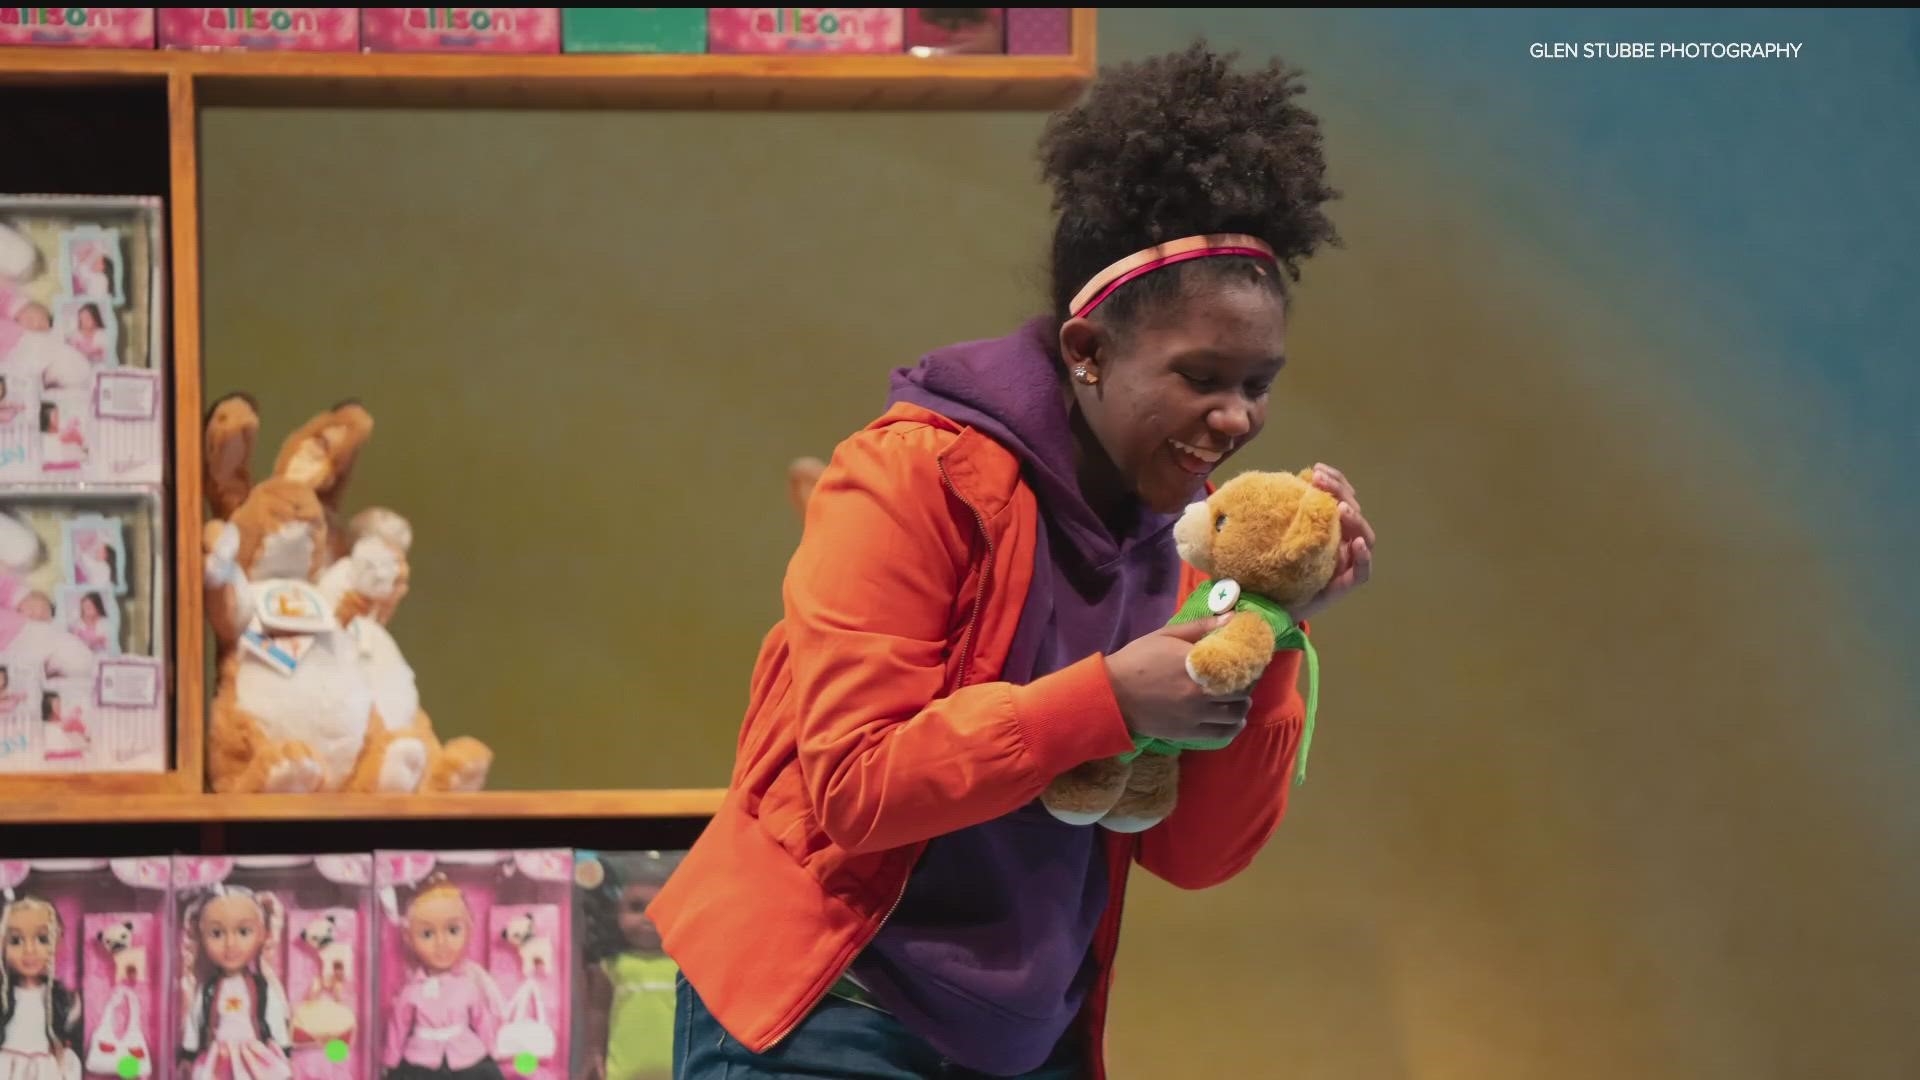 The beloved children's book character is featured in performances through April 2.